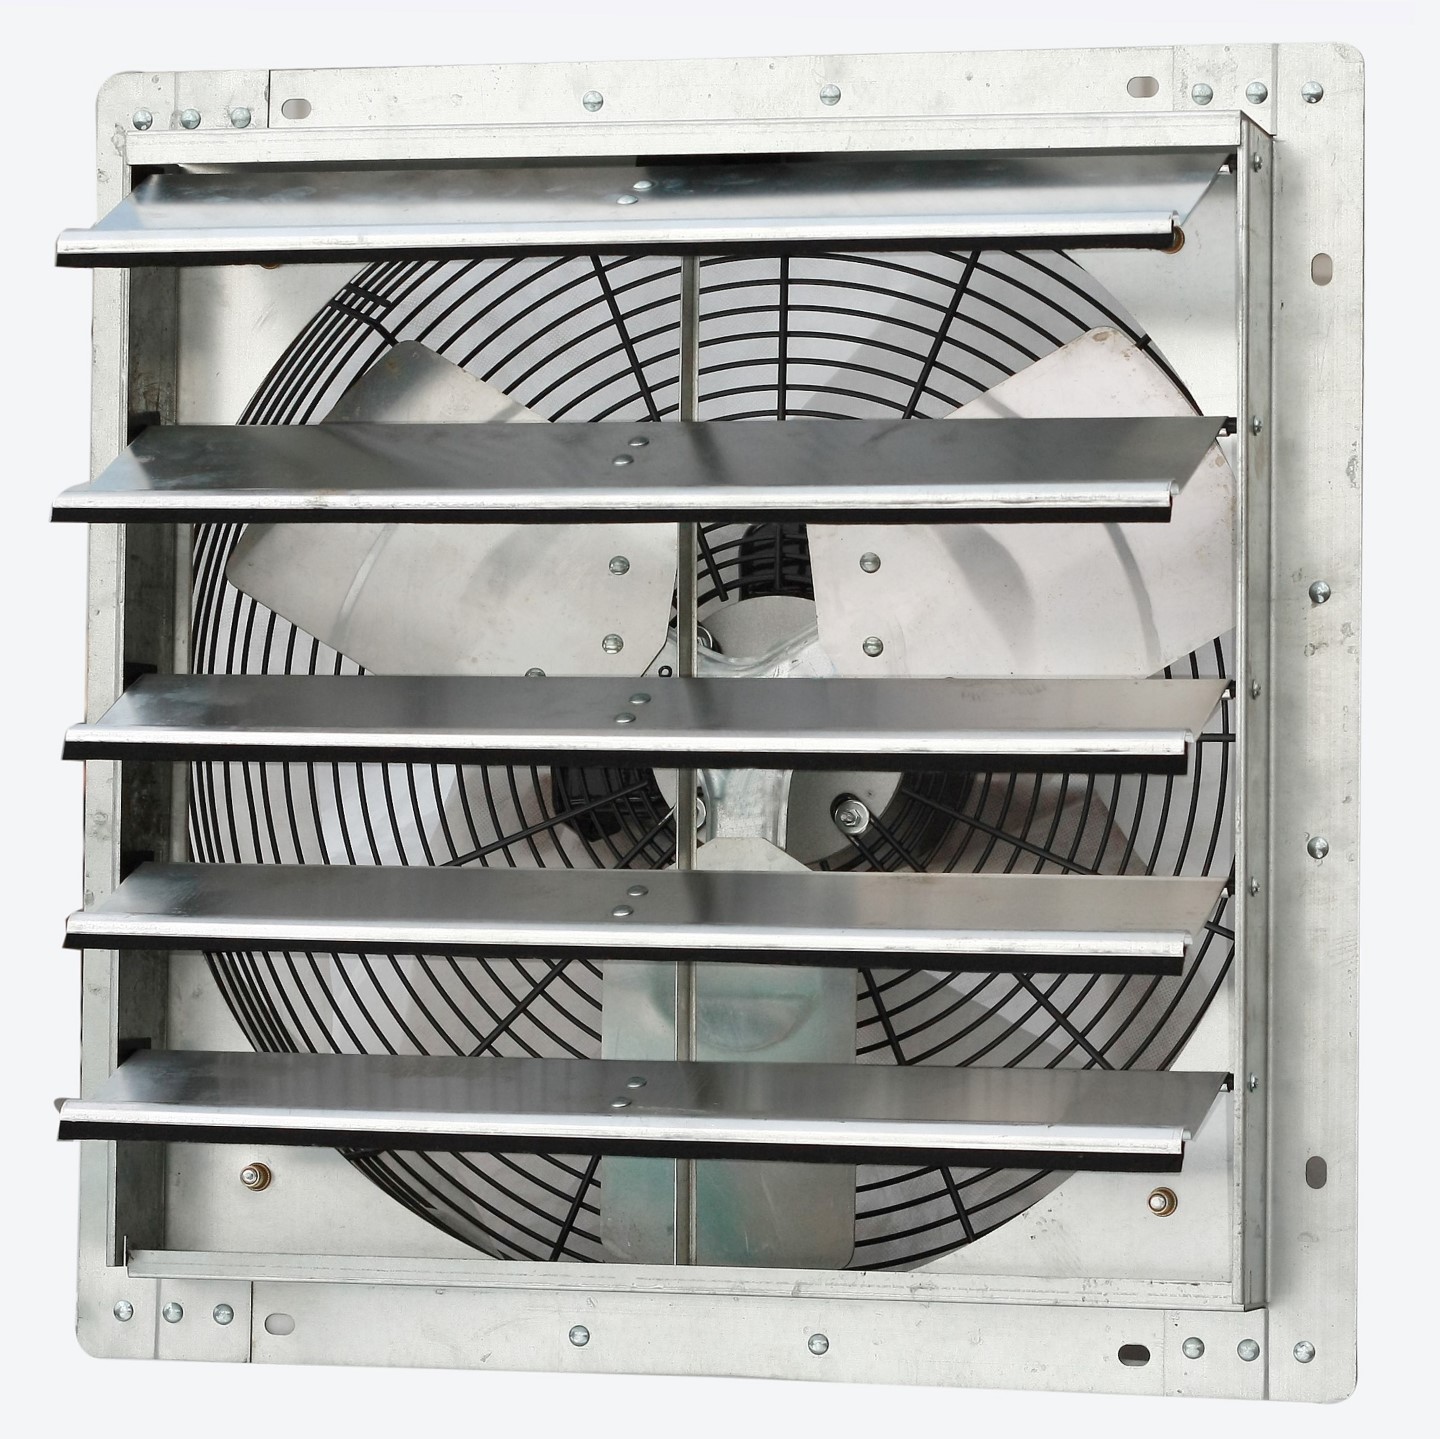 iLIVING ILG8SF18V 18 Inch Variable Speed Shutter Exhaust Fan, Wall-Mounted